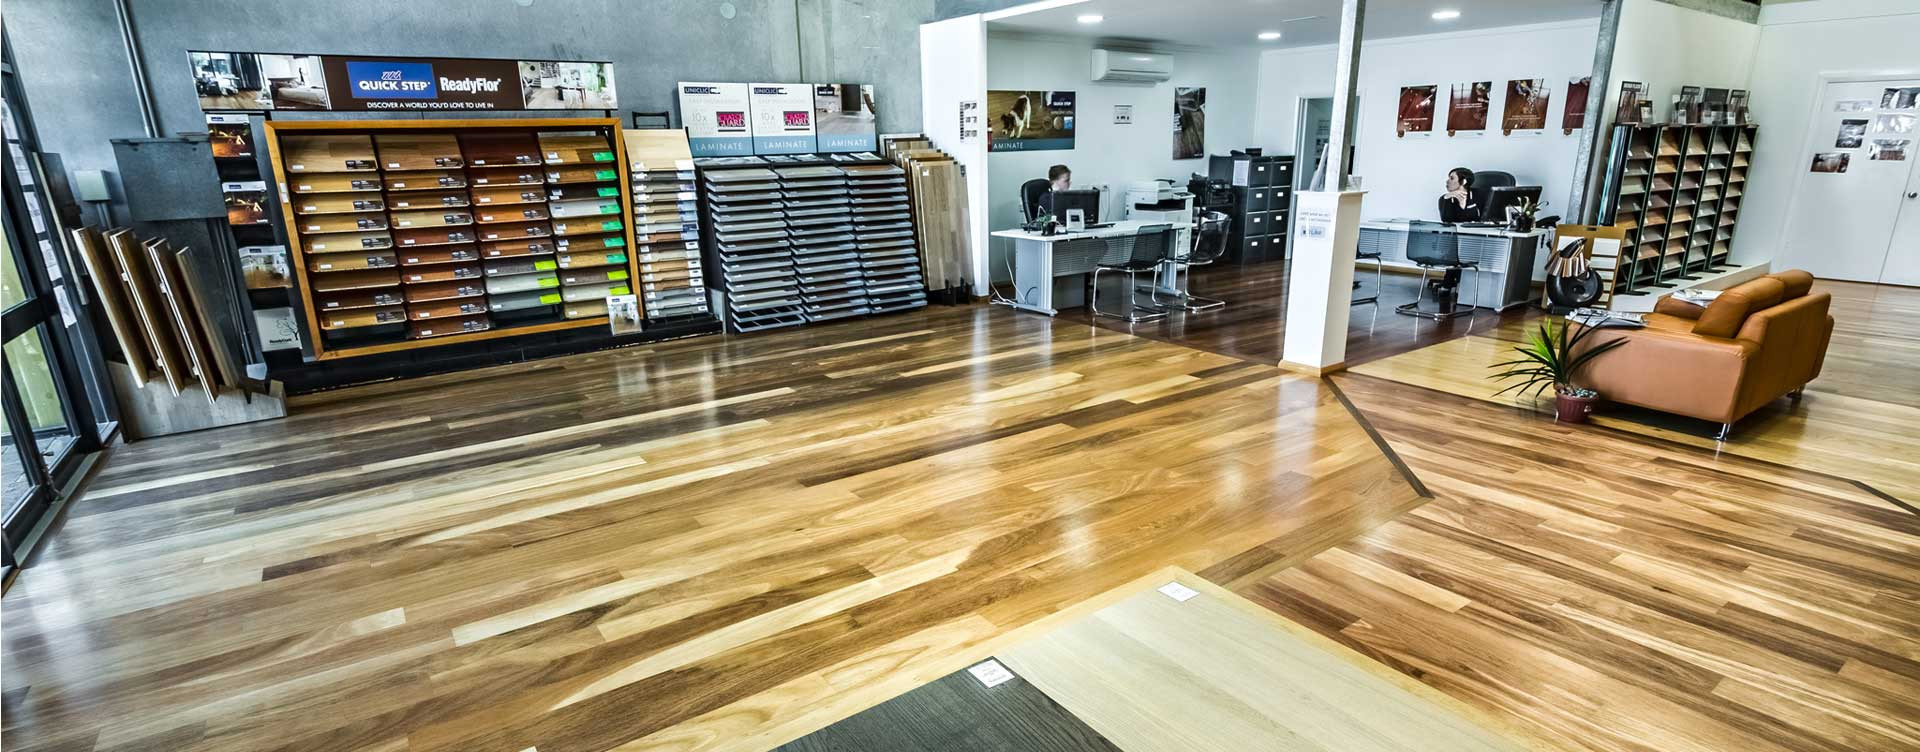 22 Great Hardwood Flooring Business Names 2024 free download hardwood flooring business names of timber flooring perth coastal flooring wa quality wooden regarding thats why they call us the home of fine wood floors